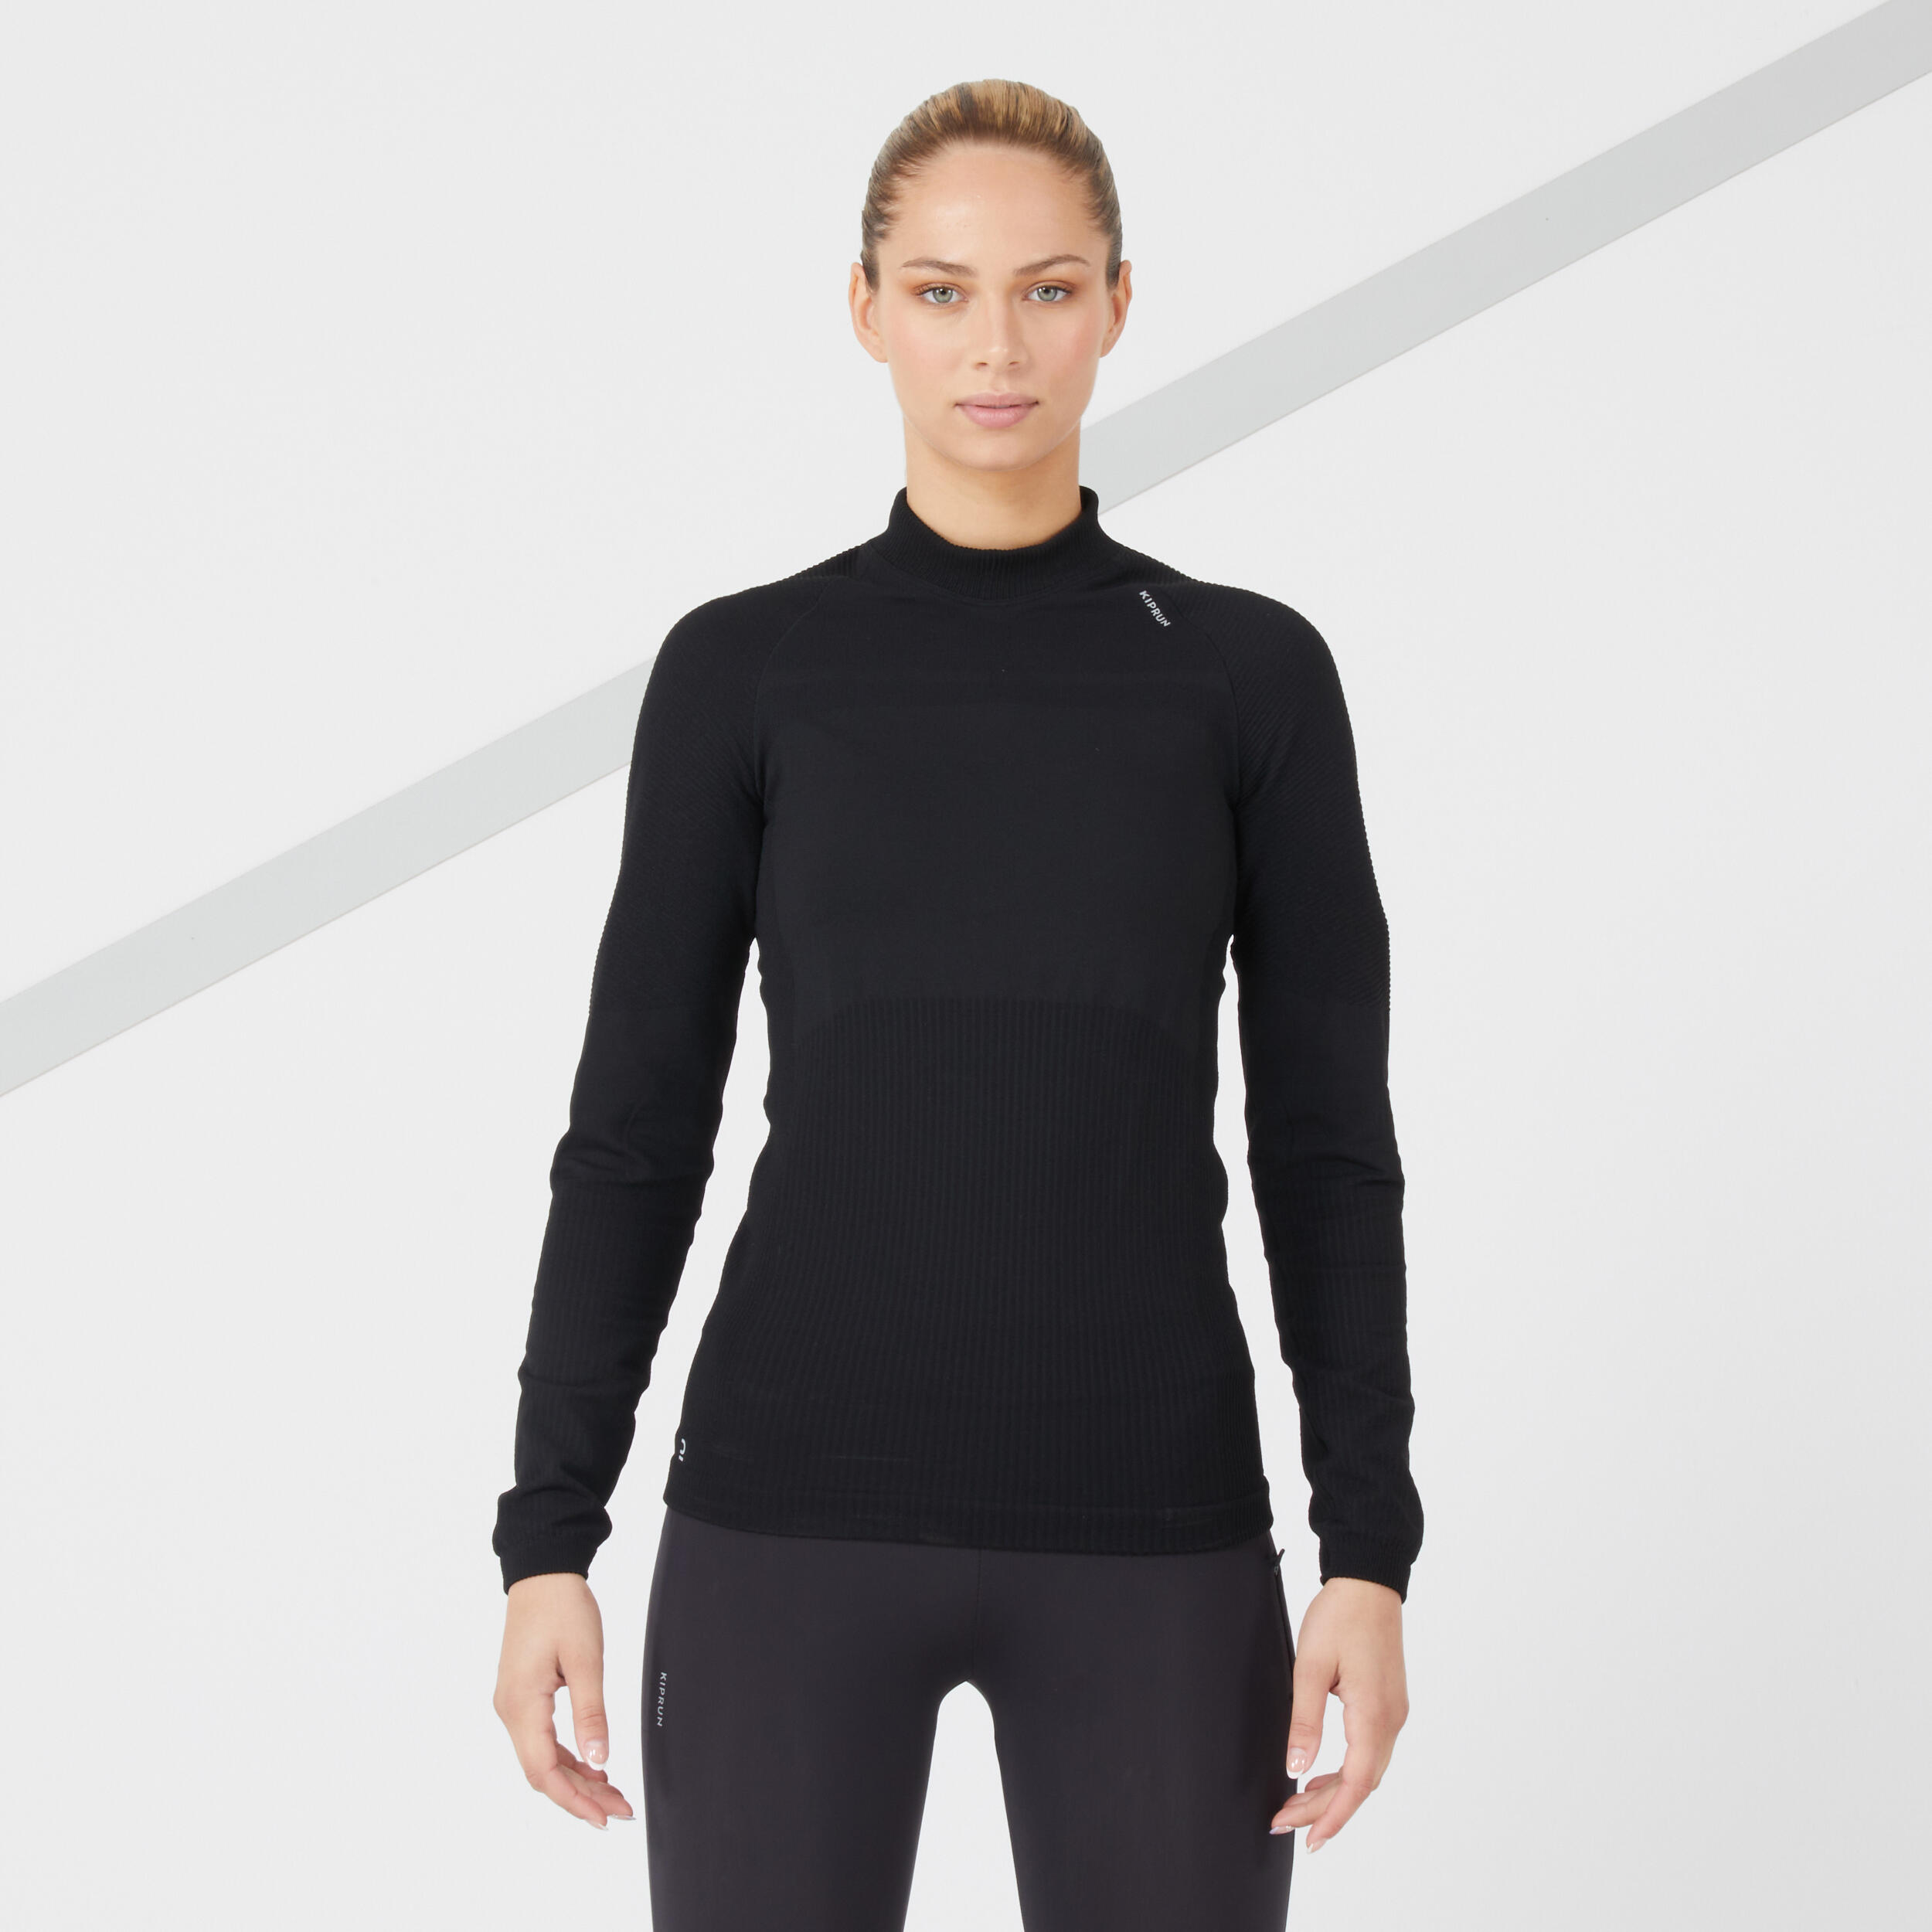 Women's Long Sleeve Active Running T-Shirt with Thumb Hole - Black